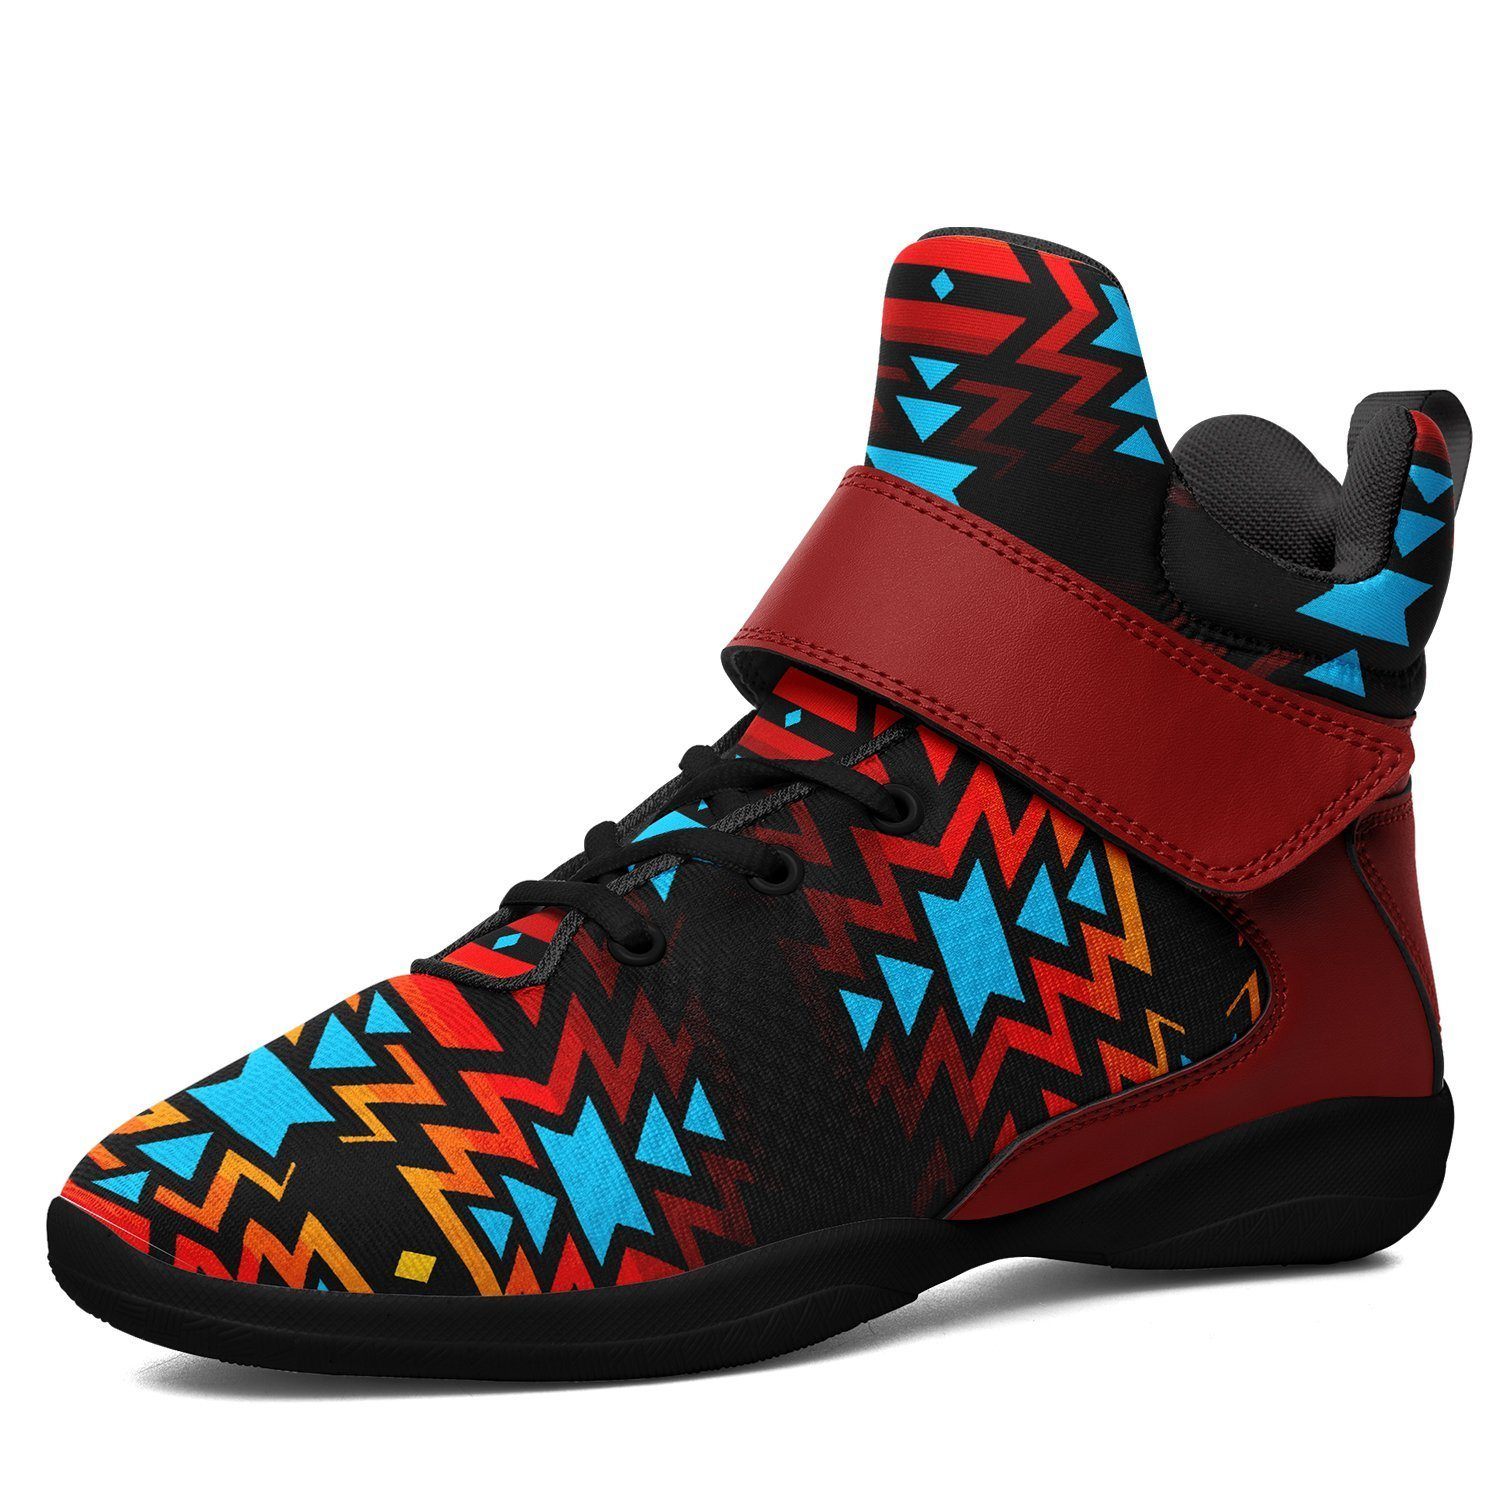 Black Fire and Turquoise Ipottaa Basketball / Sport High Top Shoes - Black Sole 49 Dzine US Men 7 / EUR 40 Black Sole with Dark Red Strap 